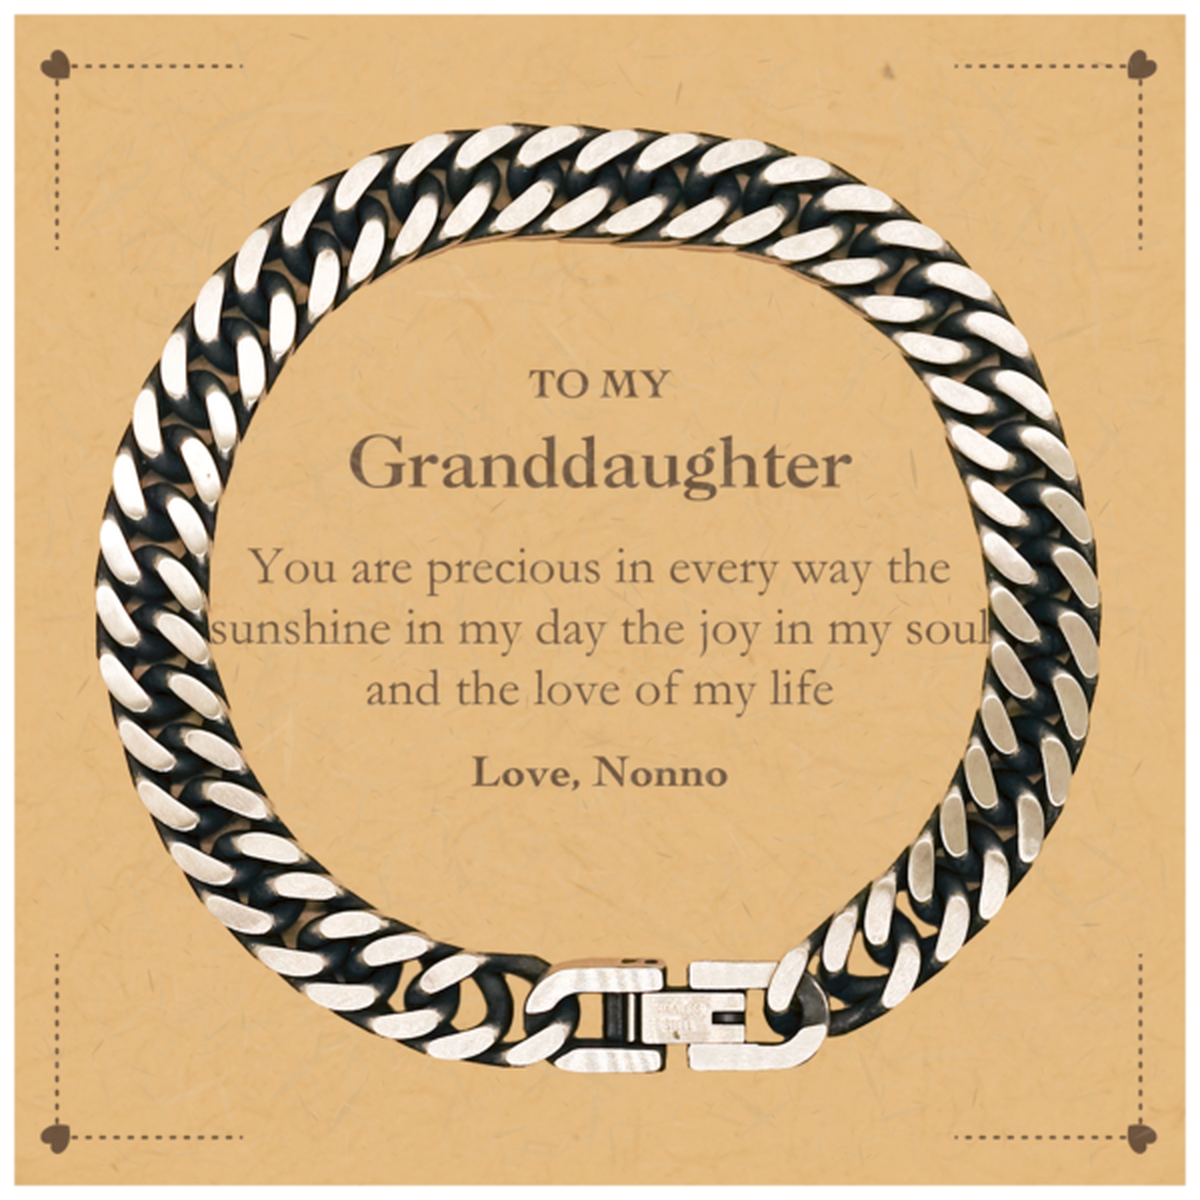 Graduation Gifts for Granddaughter Cuban Link Chain Bracelet Present from Nonno, Christmas Granddaughter Birthday Gifts Granddaughter You are precious in every way the sunshine in my day. Love, Nonno